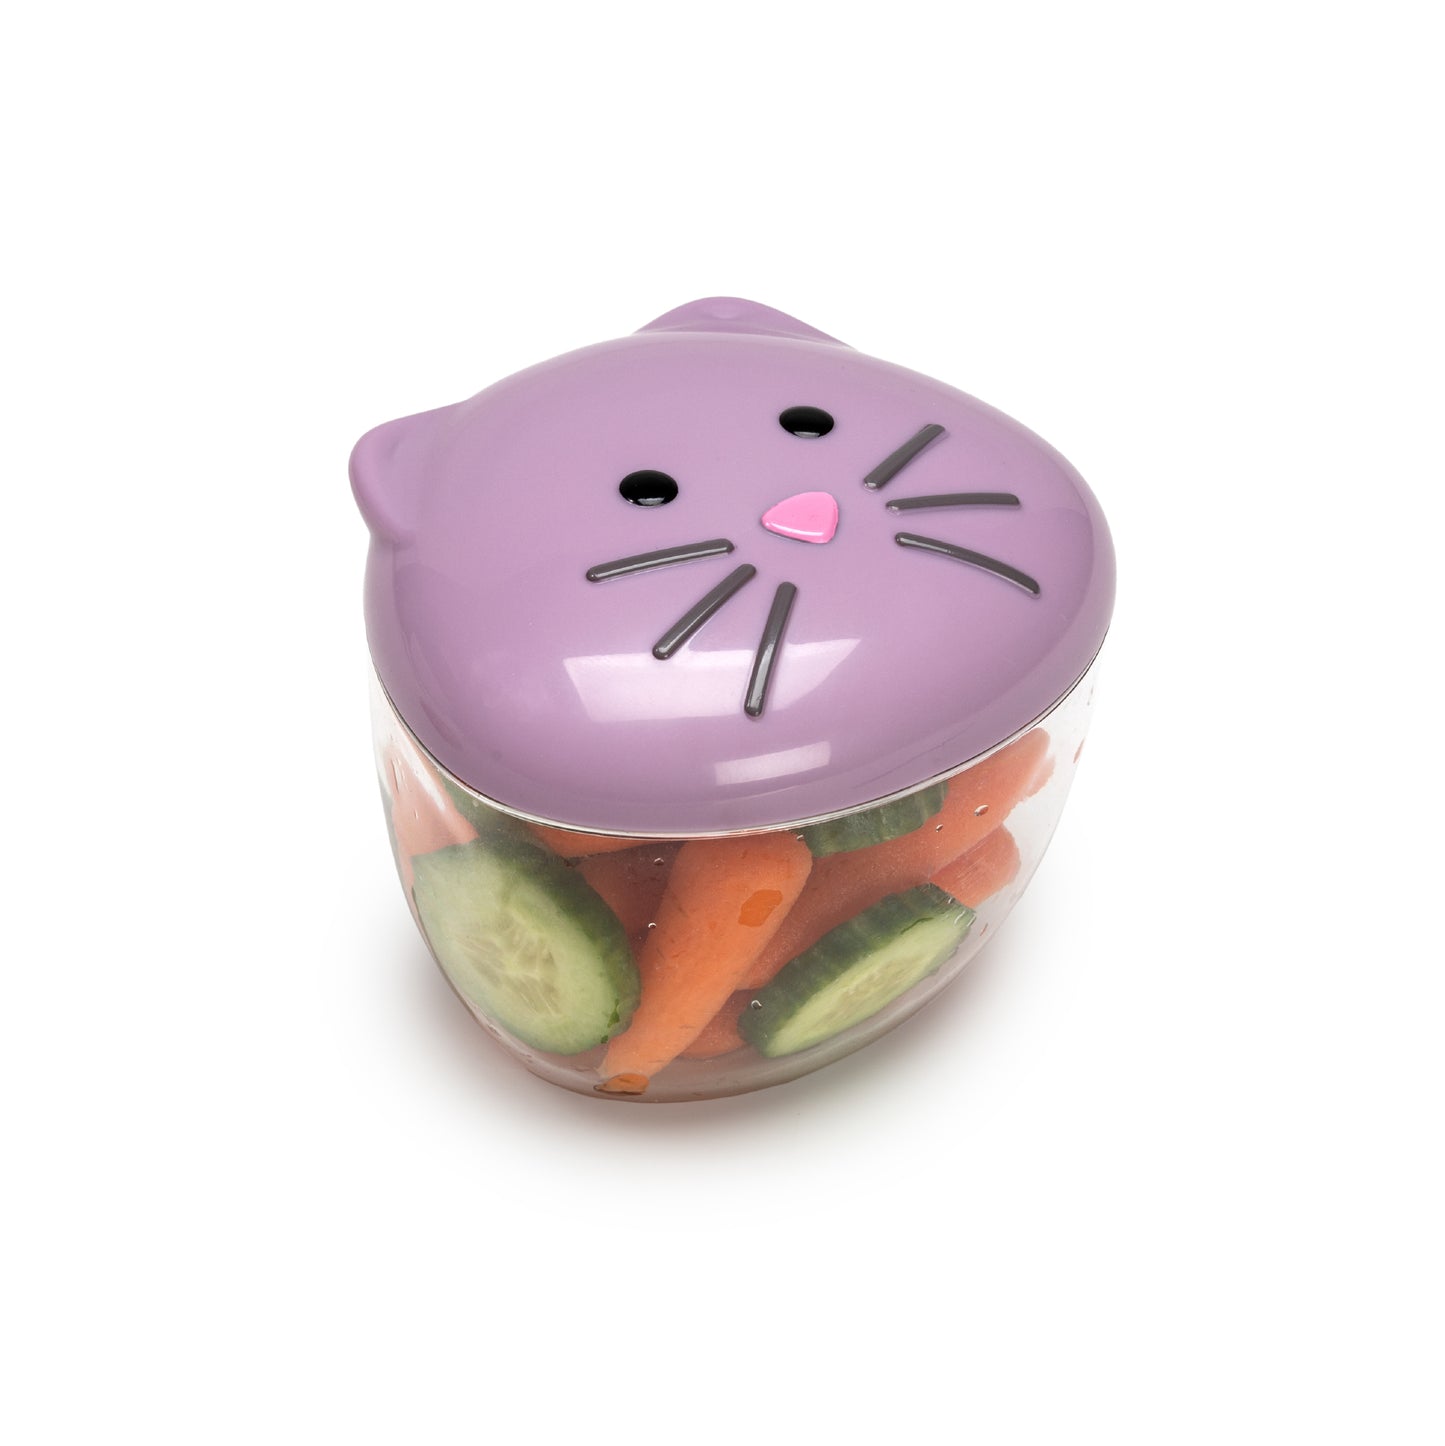 Melii Cat Snack Containers - Adorable, Airtight, and Leakproof Designs for Kids - BPA Free, Easy Clean, Perfect for On the Go Snacking and Lunch Boxes